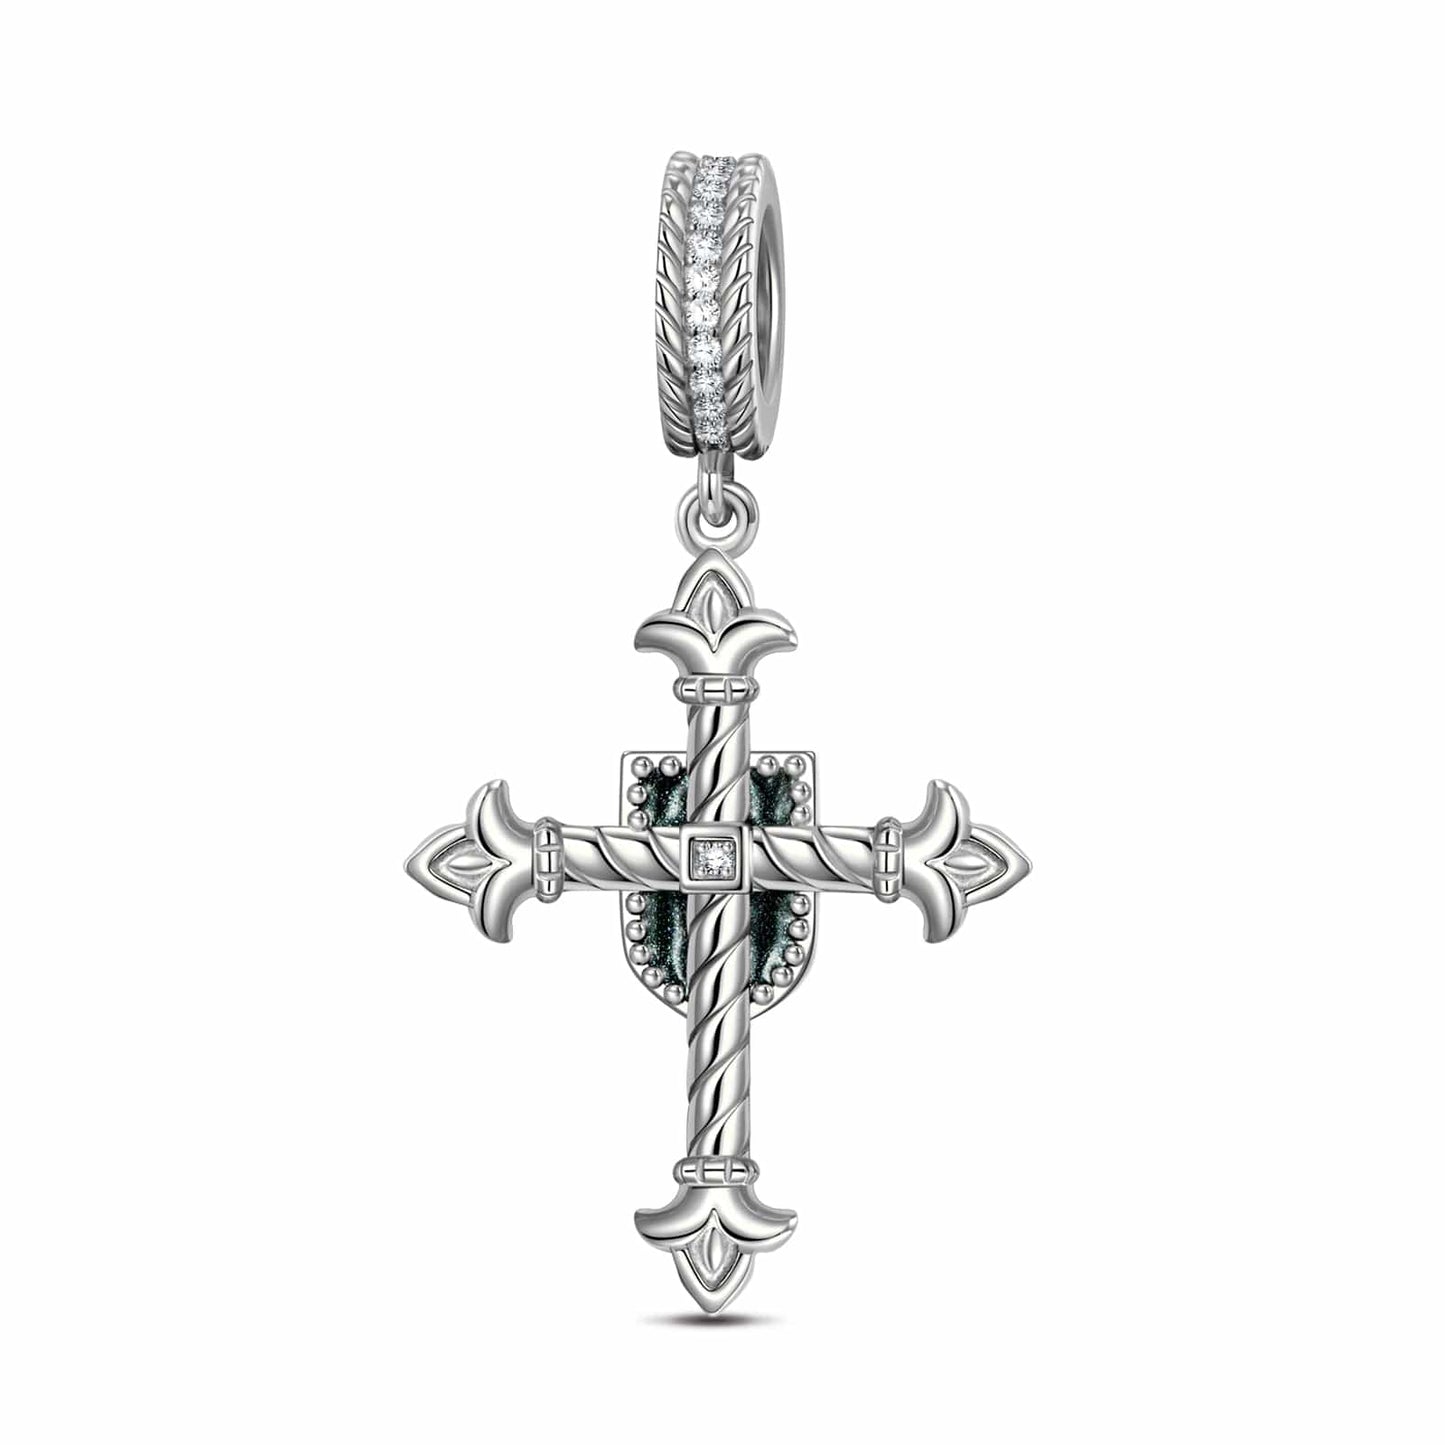 Sterling Silver XL Size The Eye of God Charms With Enamel In Blackened 925 Sterling Silver Plated For Men